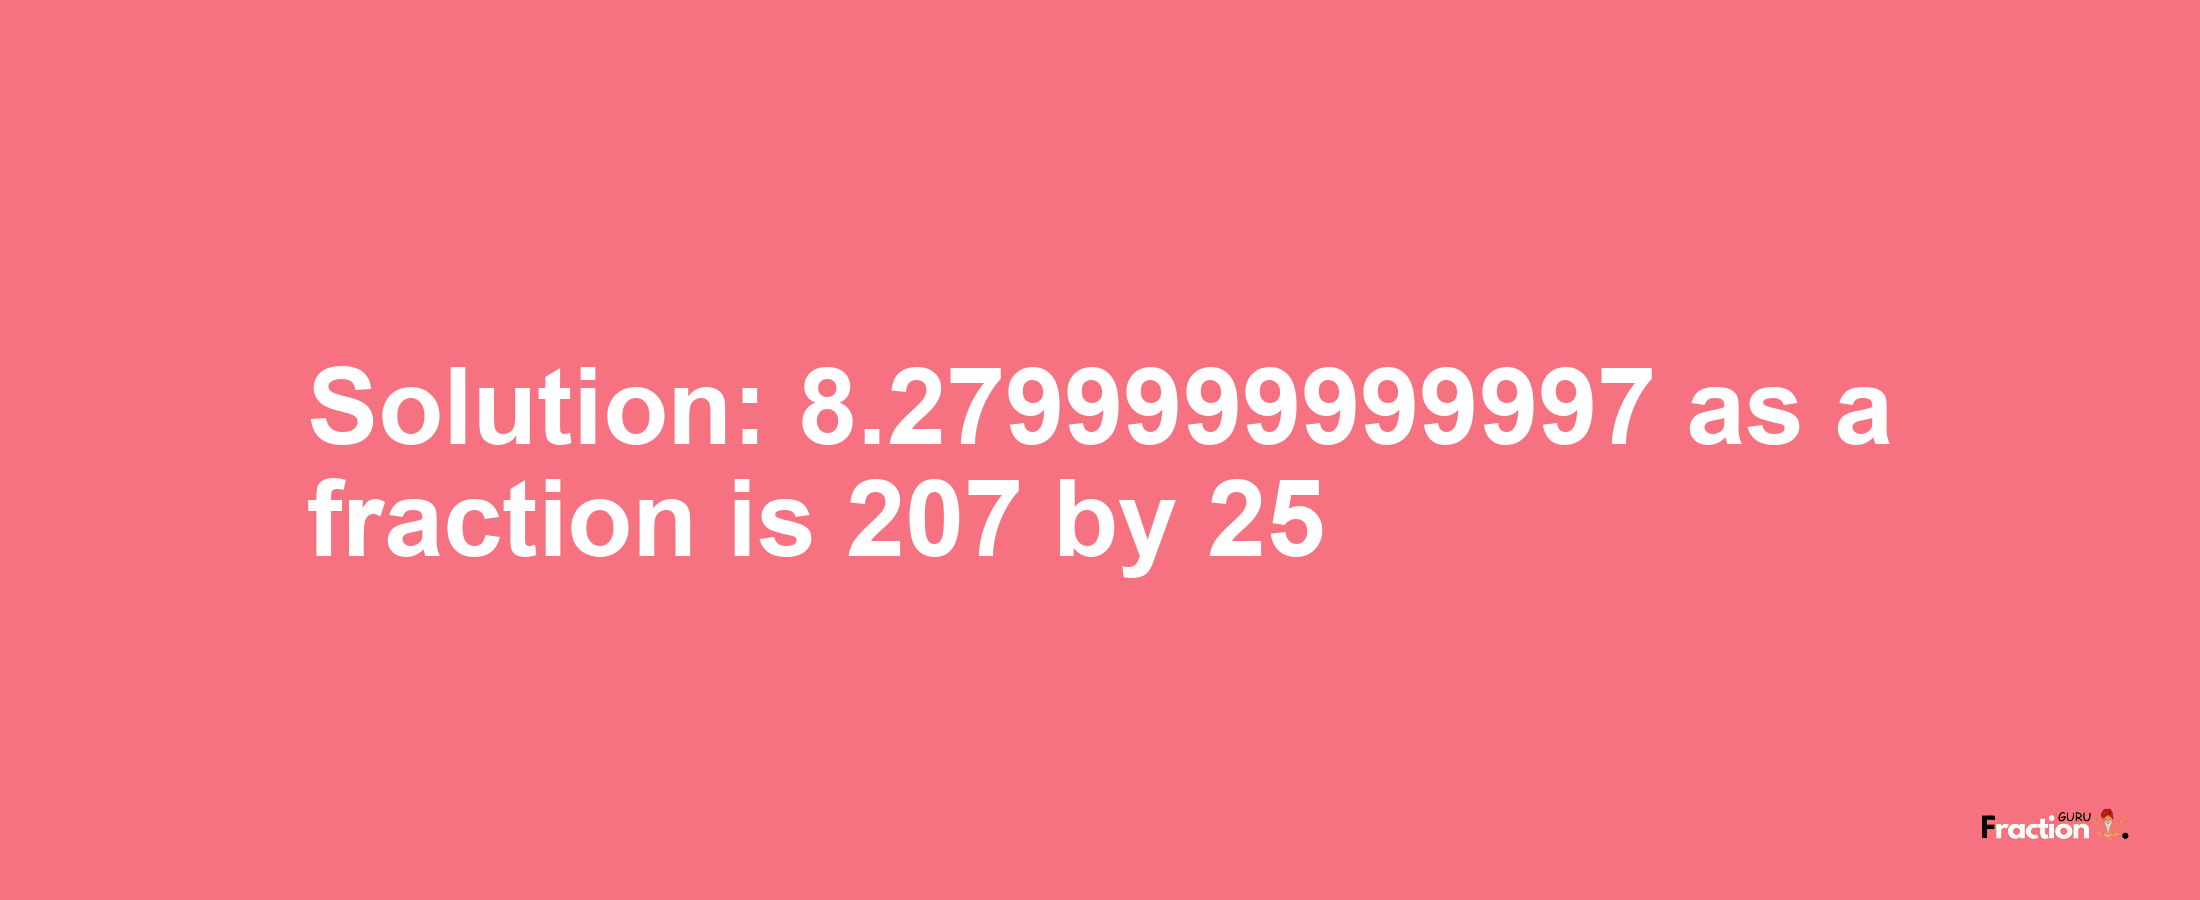 Solution:8.2799999999997 as a fraction is 207/25